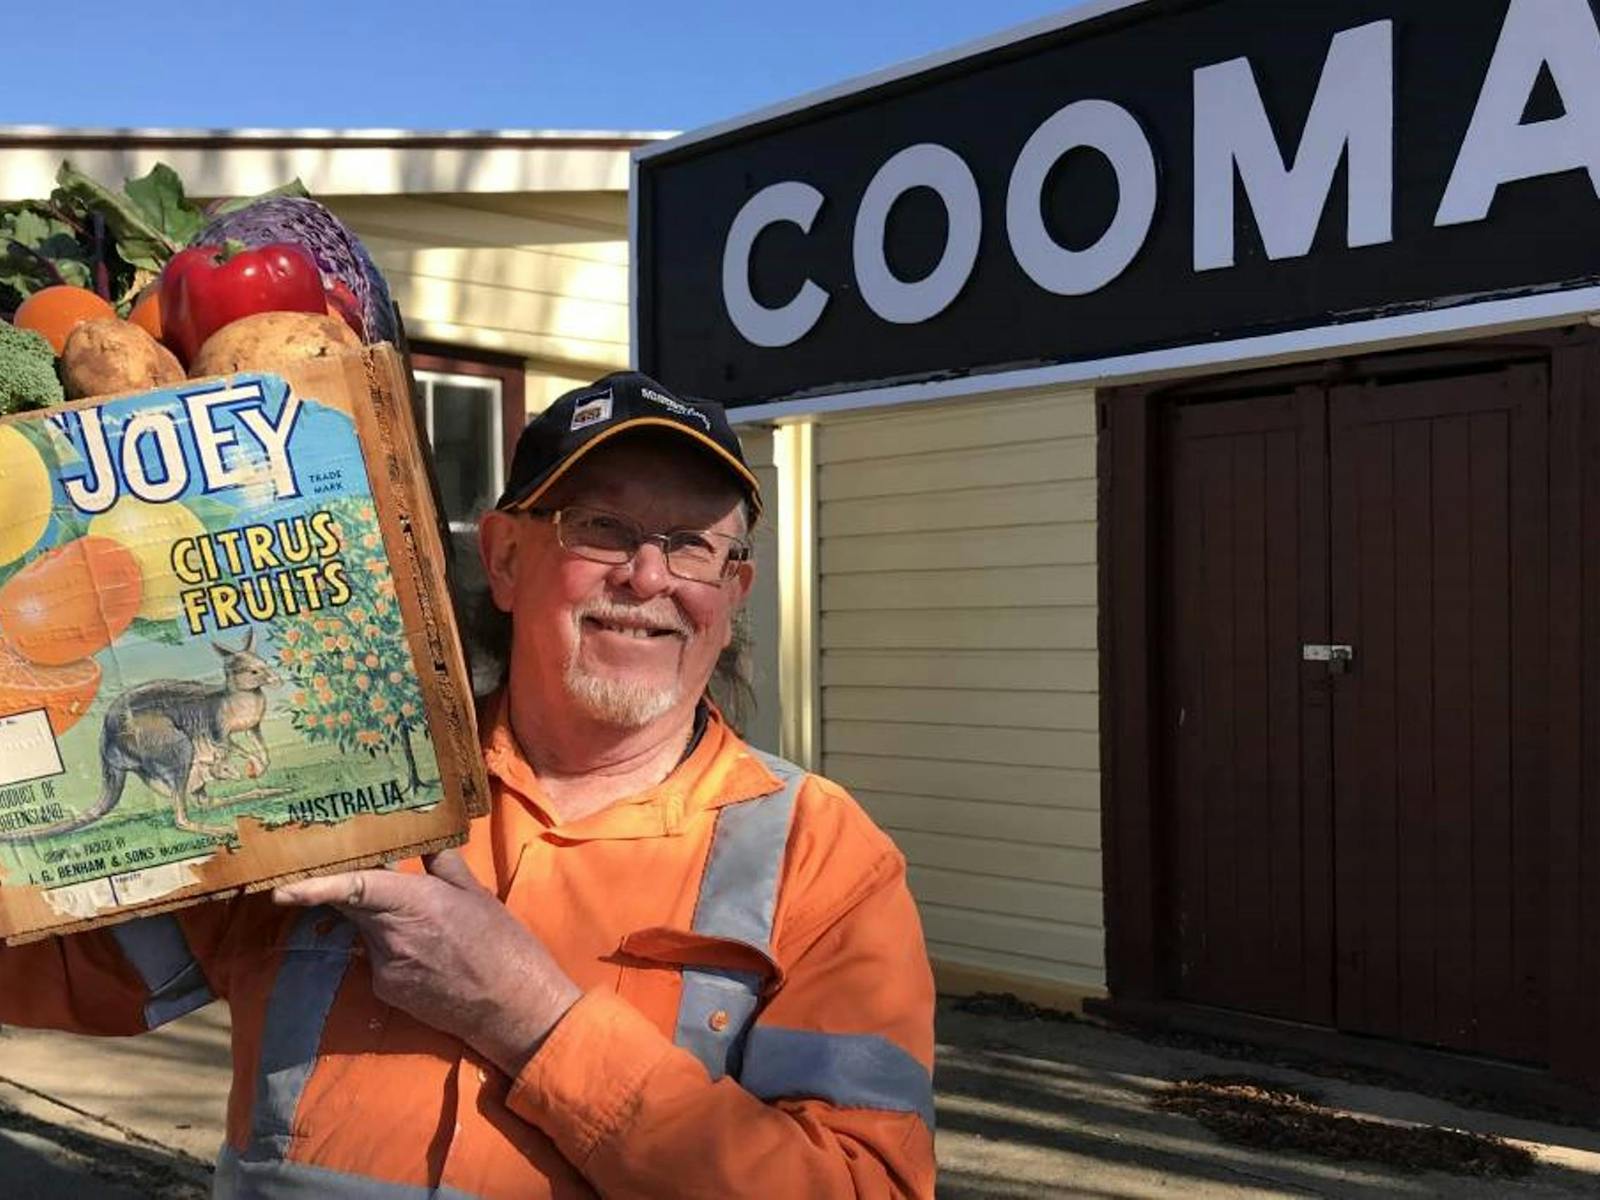 Image for Cooma CMR Railway Fresh Produce Markets